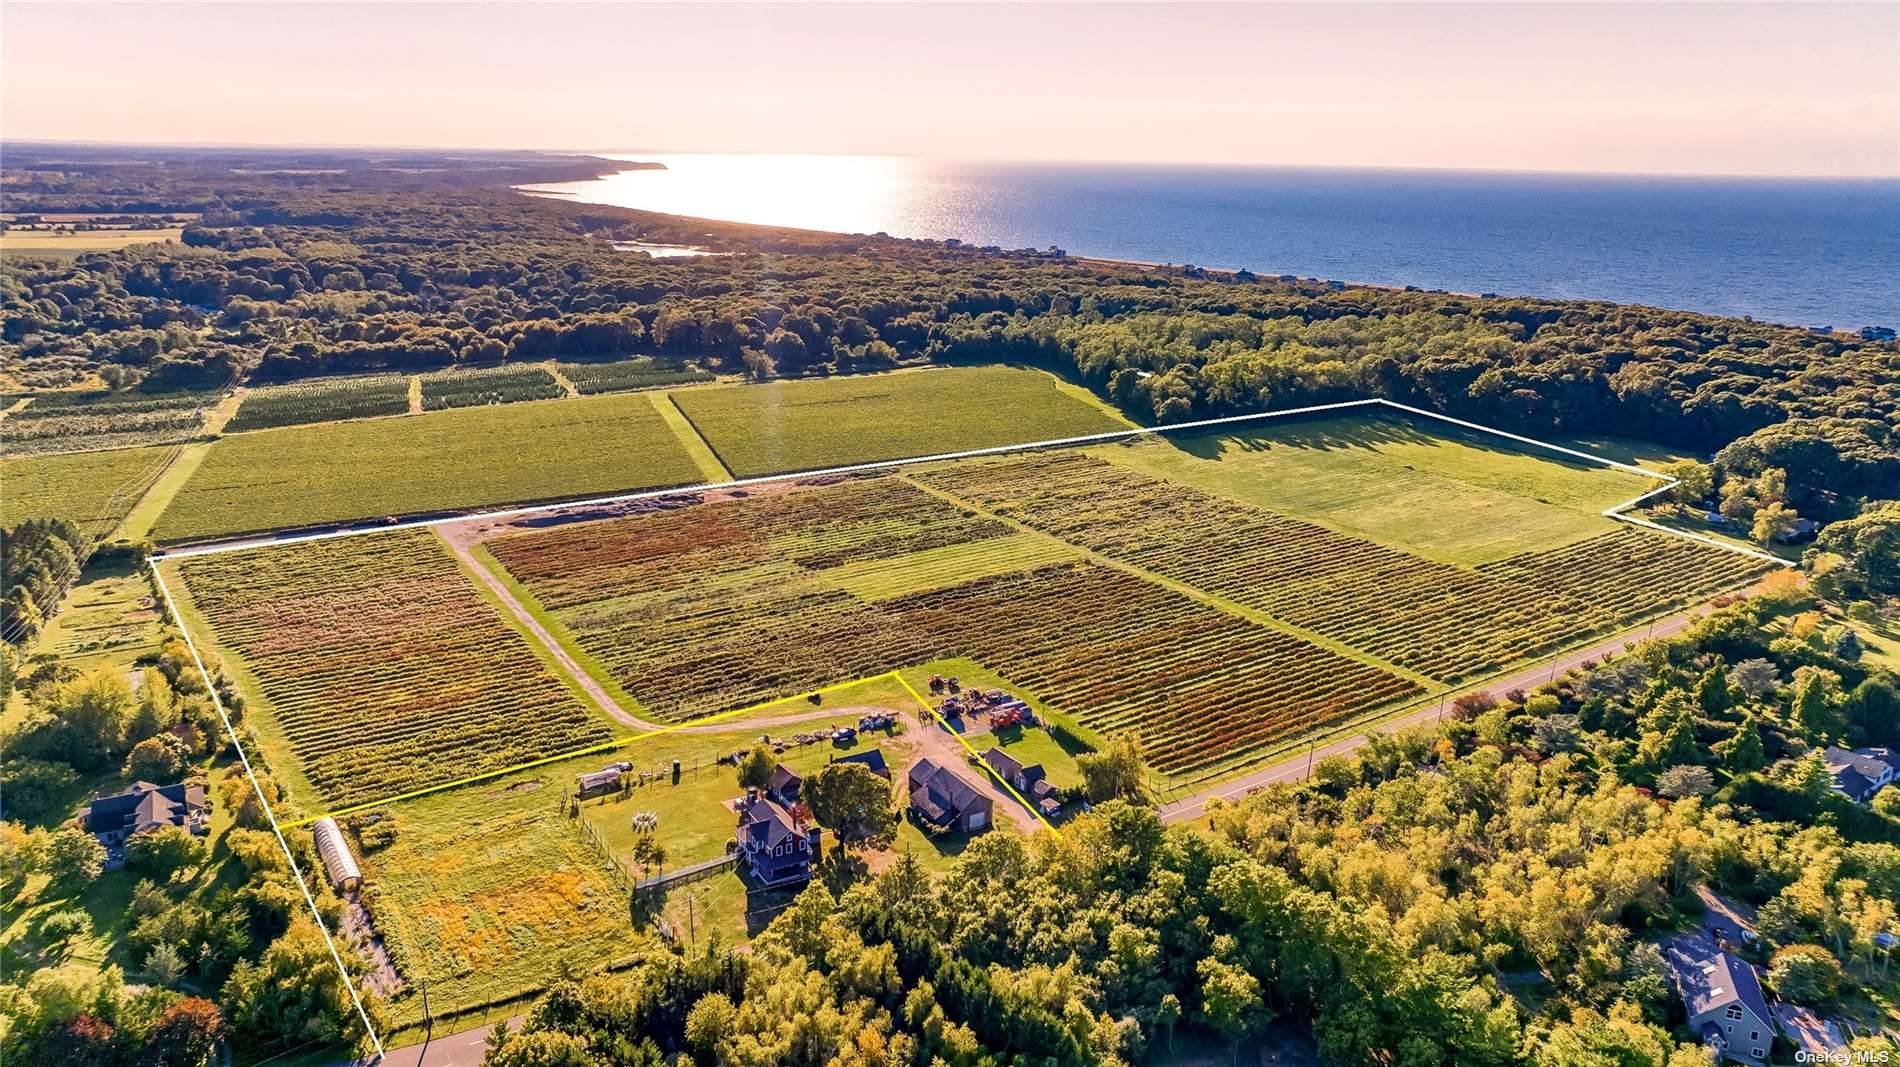 Southold, North Fork Over 30 acres of active farmland planted with nearly 40, 000 blueberry bushes and approximately 10 acres of fallow, open farmland for expansion or other agricultural uses.